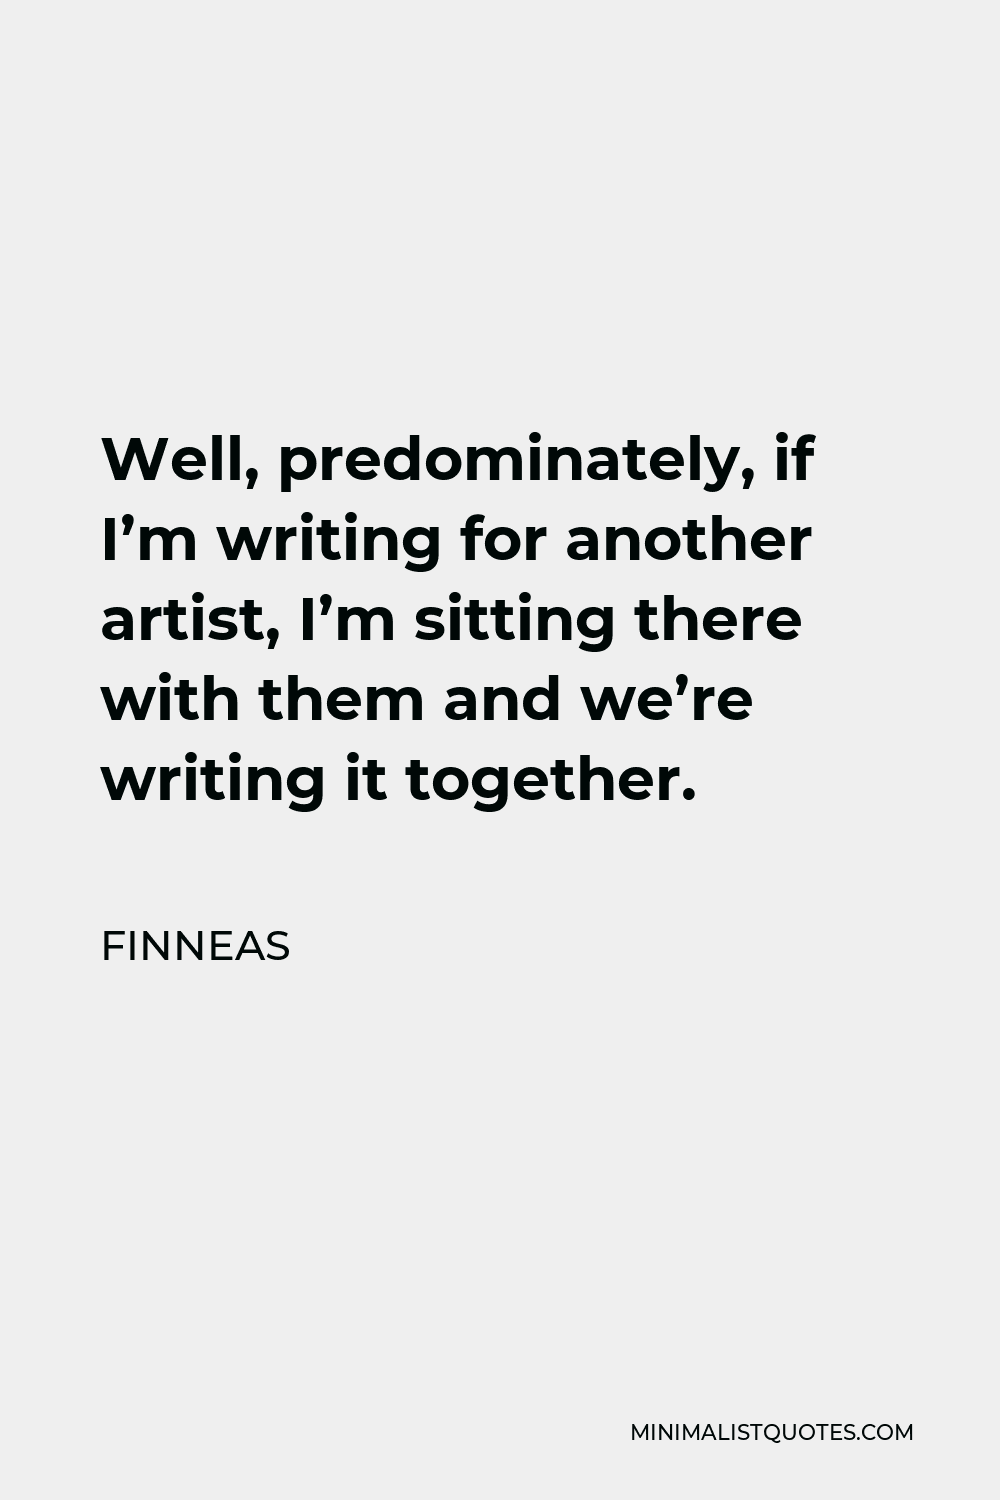 Finneas Quote - Well, predominately, if I’m writing for another artist, I’m sitting there with them and we’re writing it together.